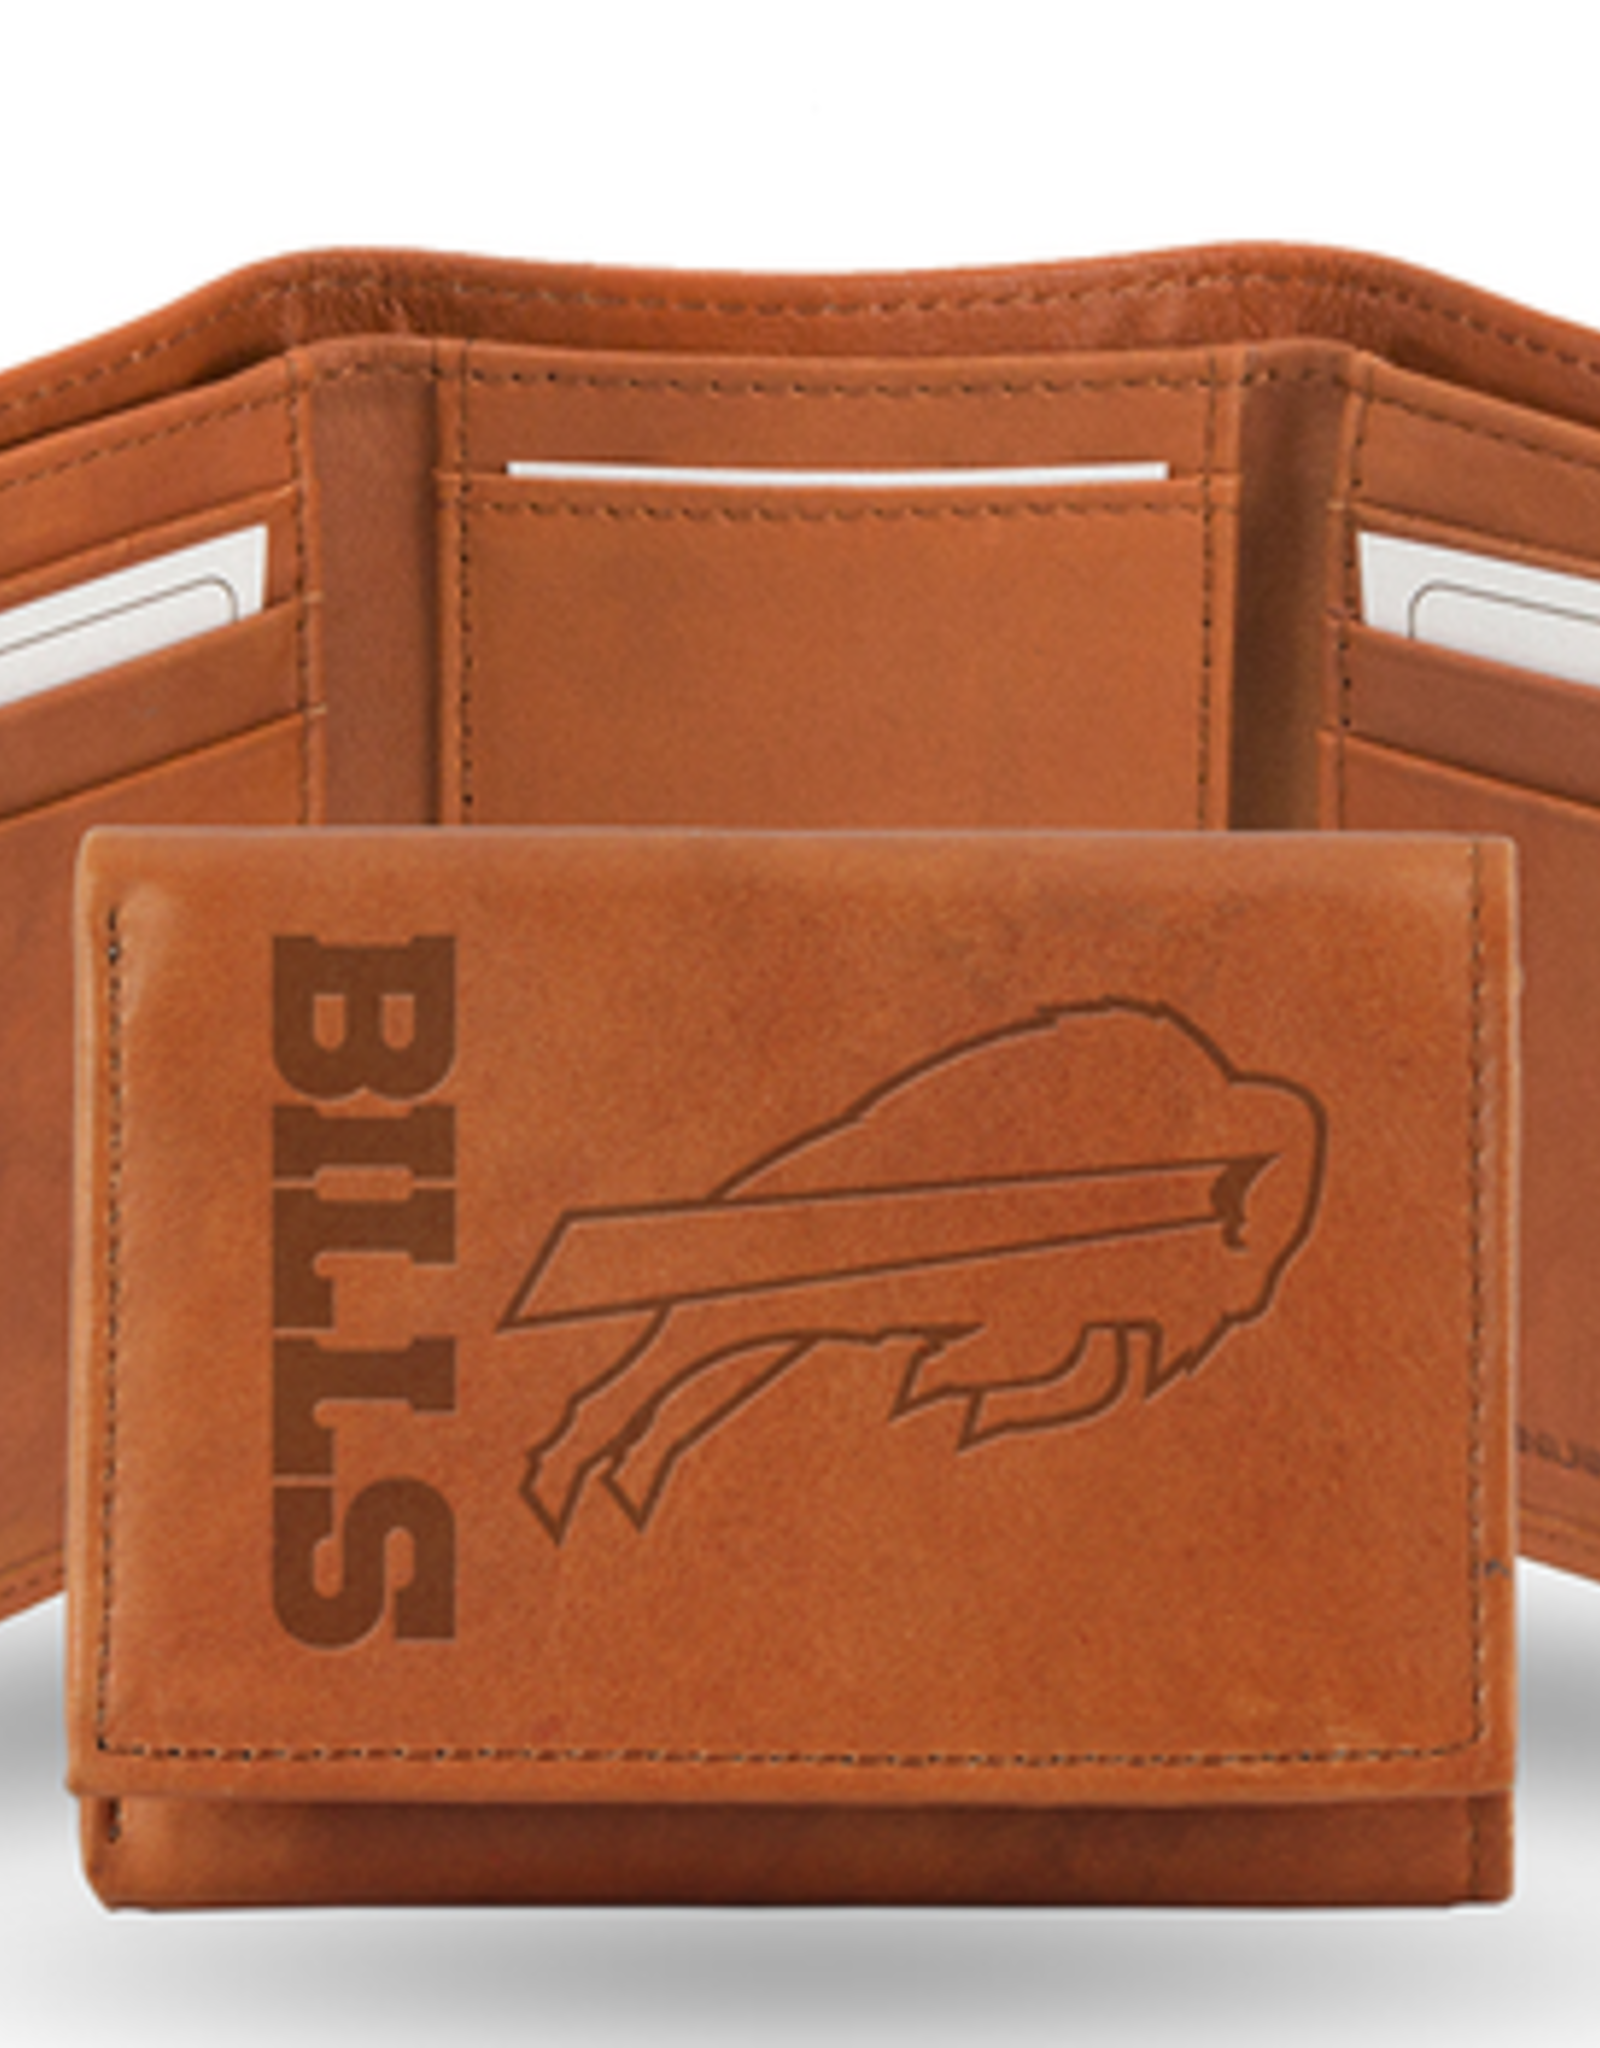 RICO INDUSTRIES Buffalo Bills Vintage Leather Trifold Wallet